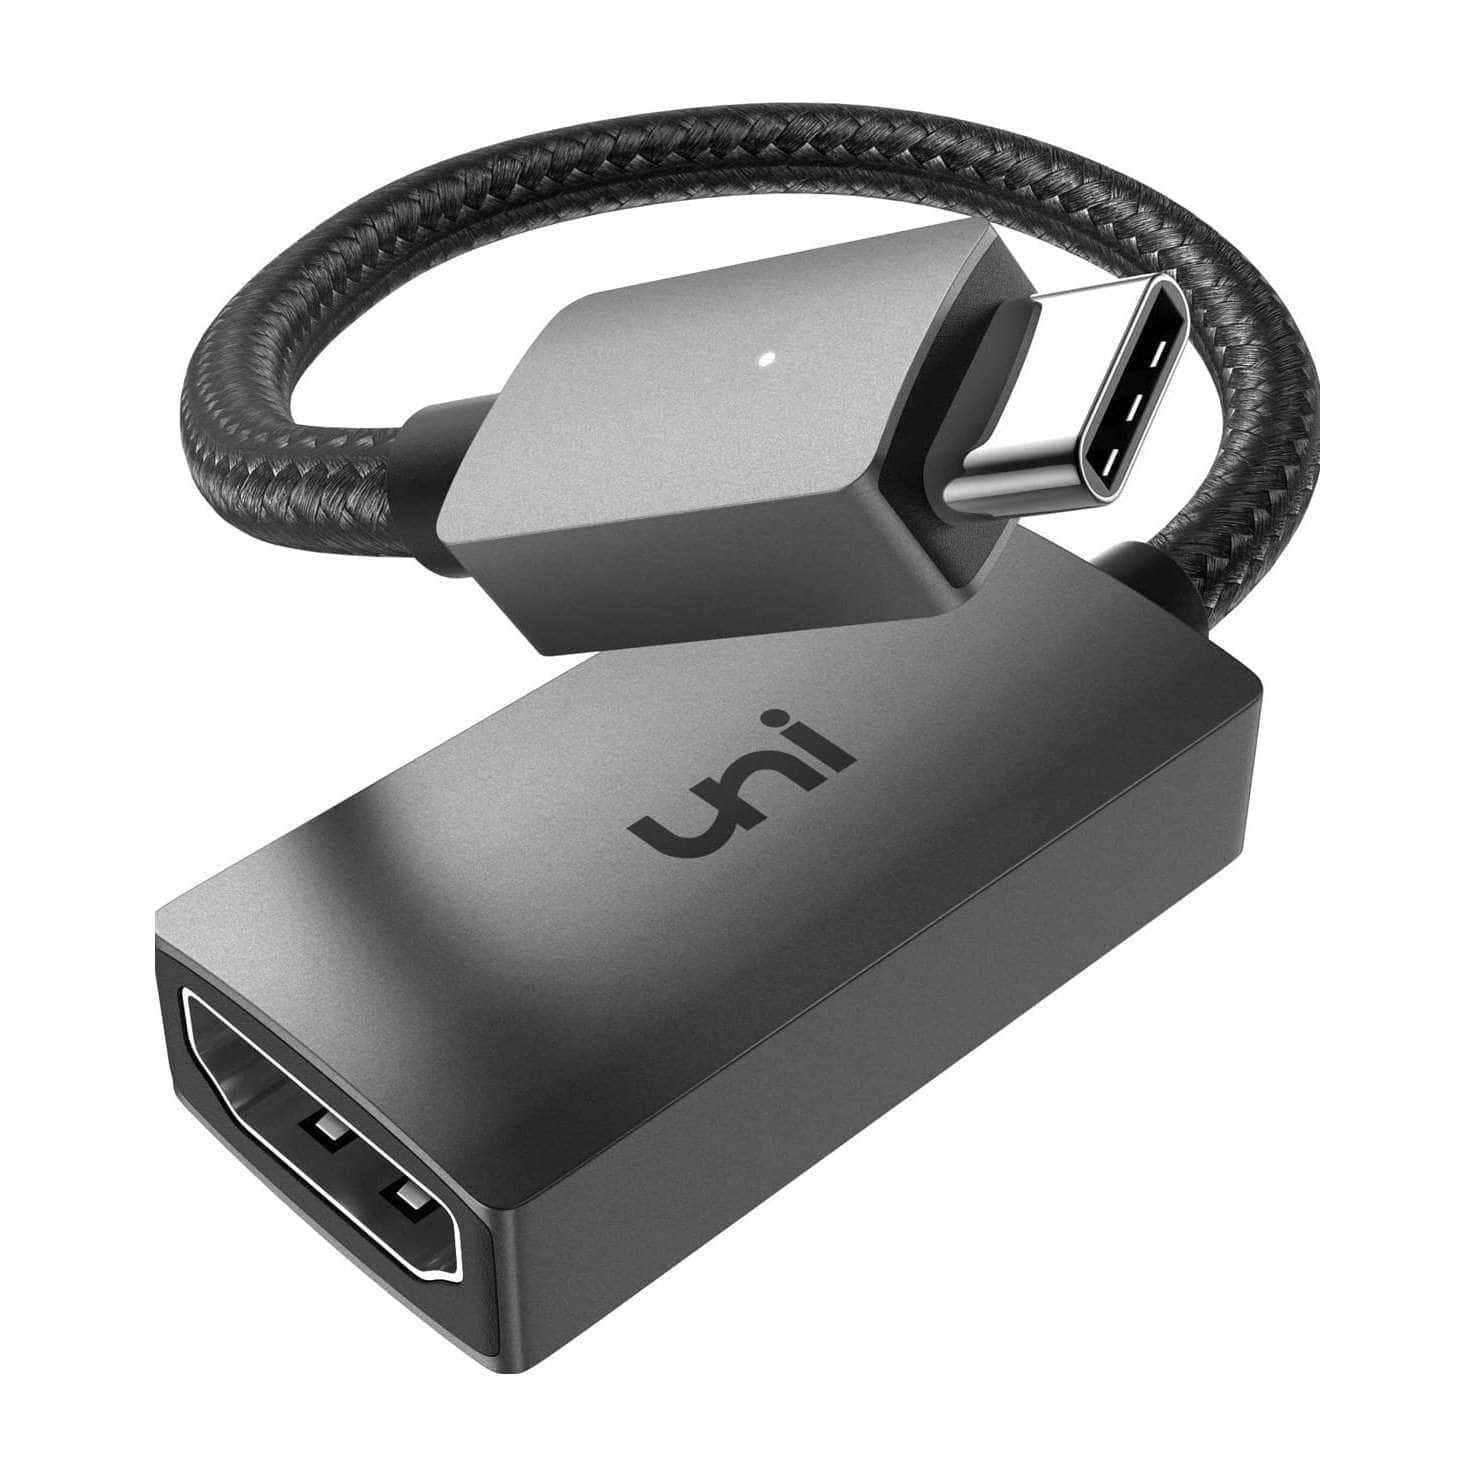 USB C to HDMI Adapter 4K, Dual Monitor Setup for MacBook Pro